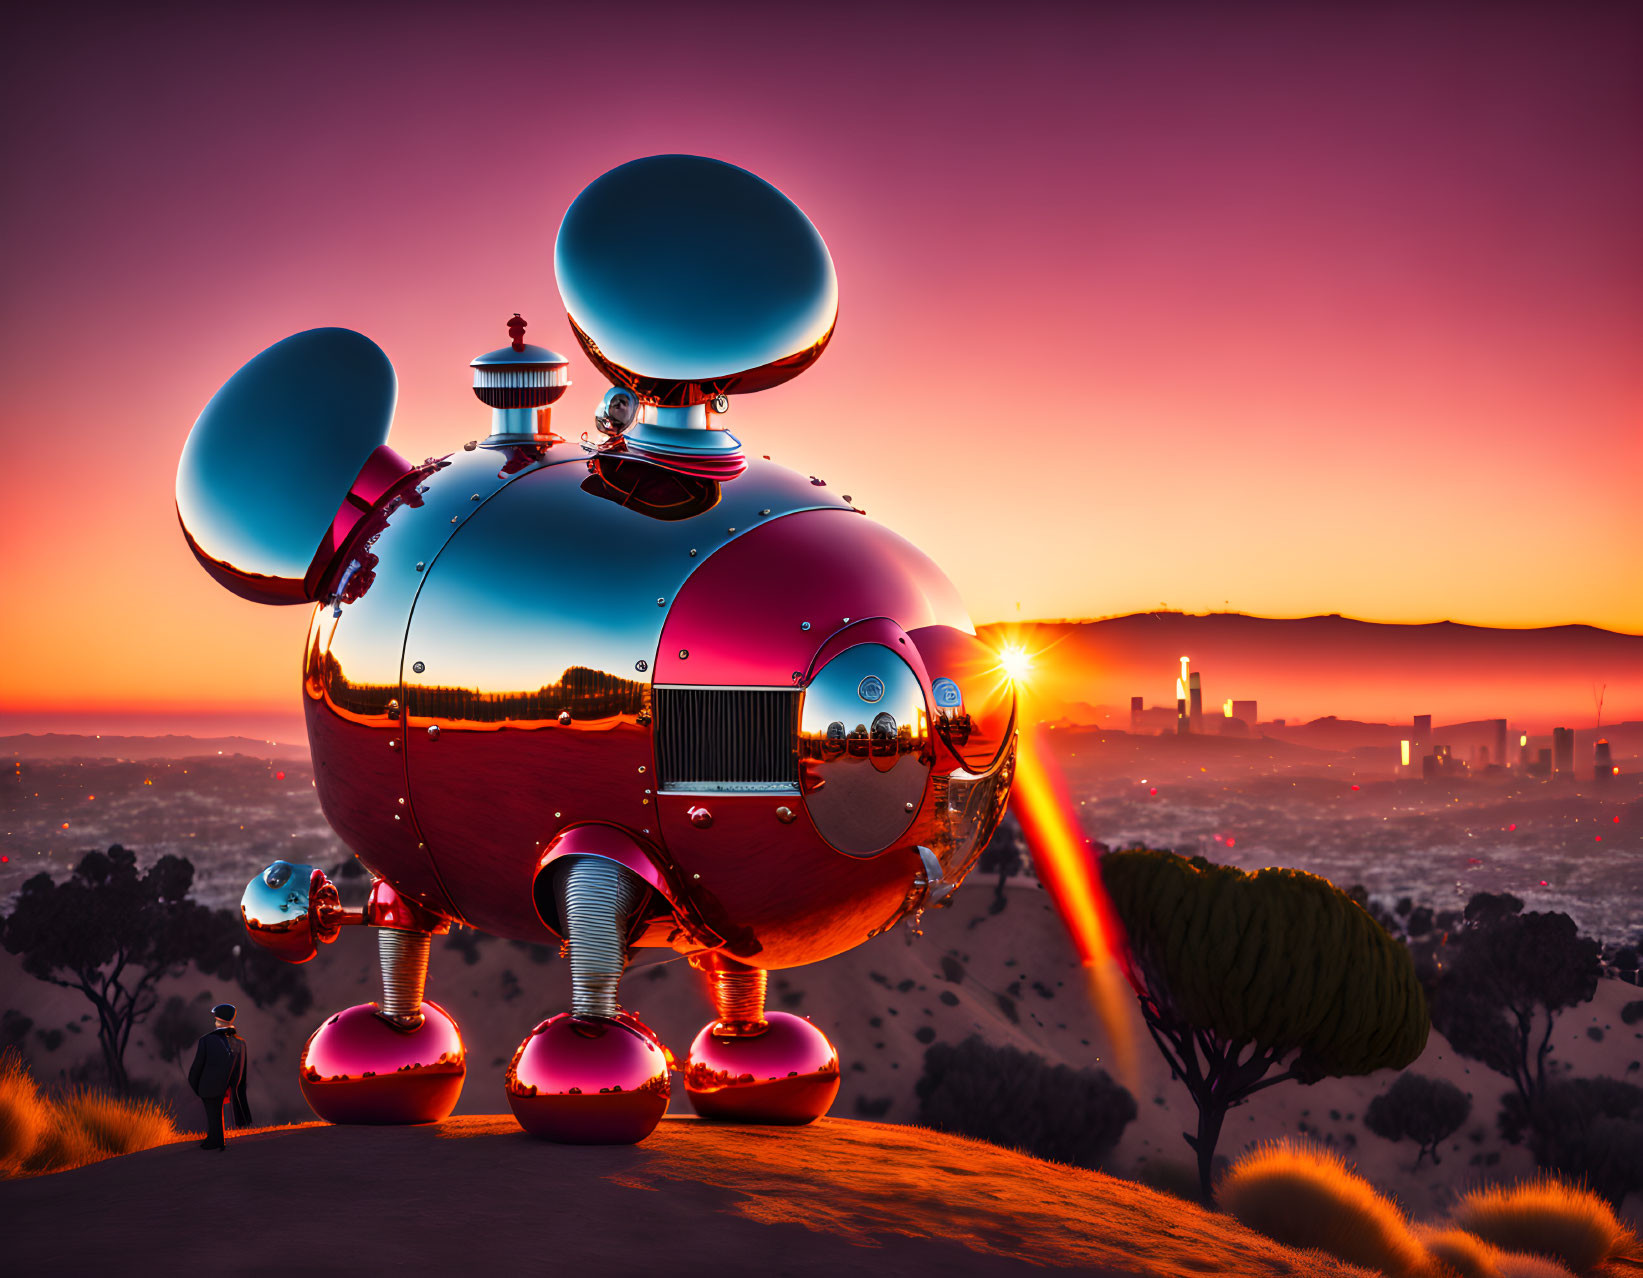 Futuristic spherical red vehicle with round appendages overlooking city at sunset